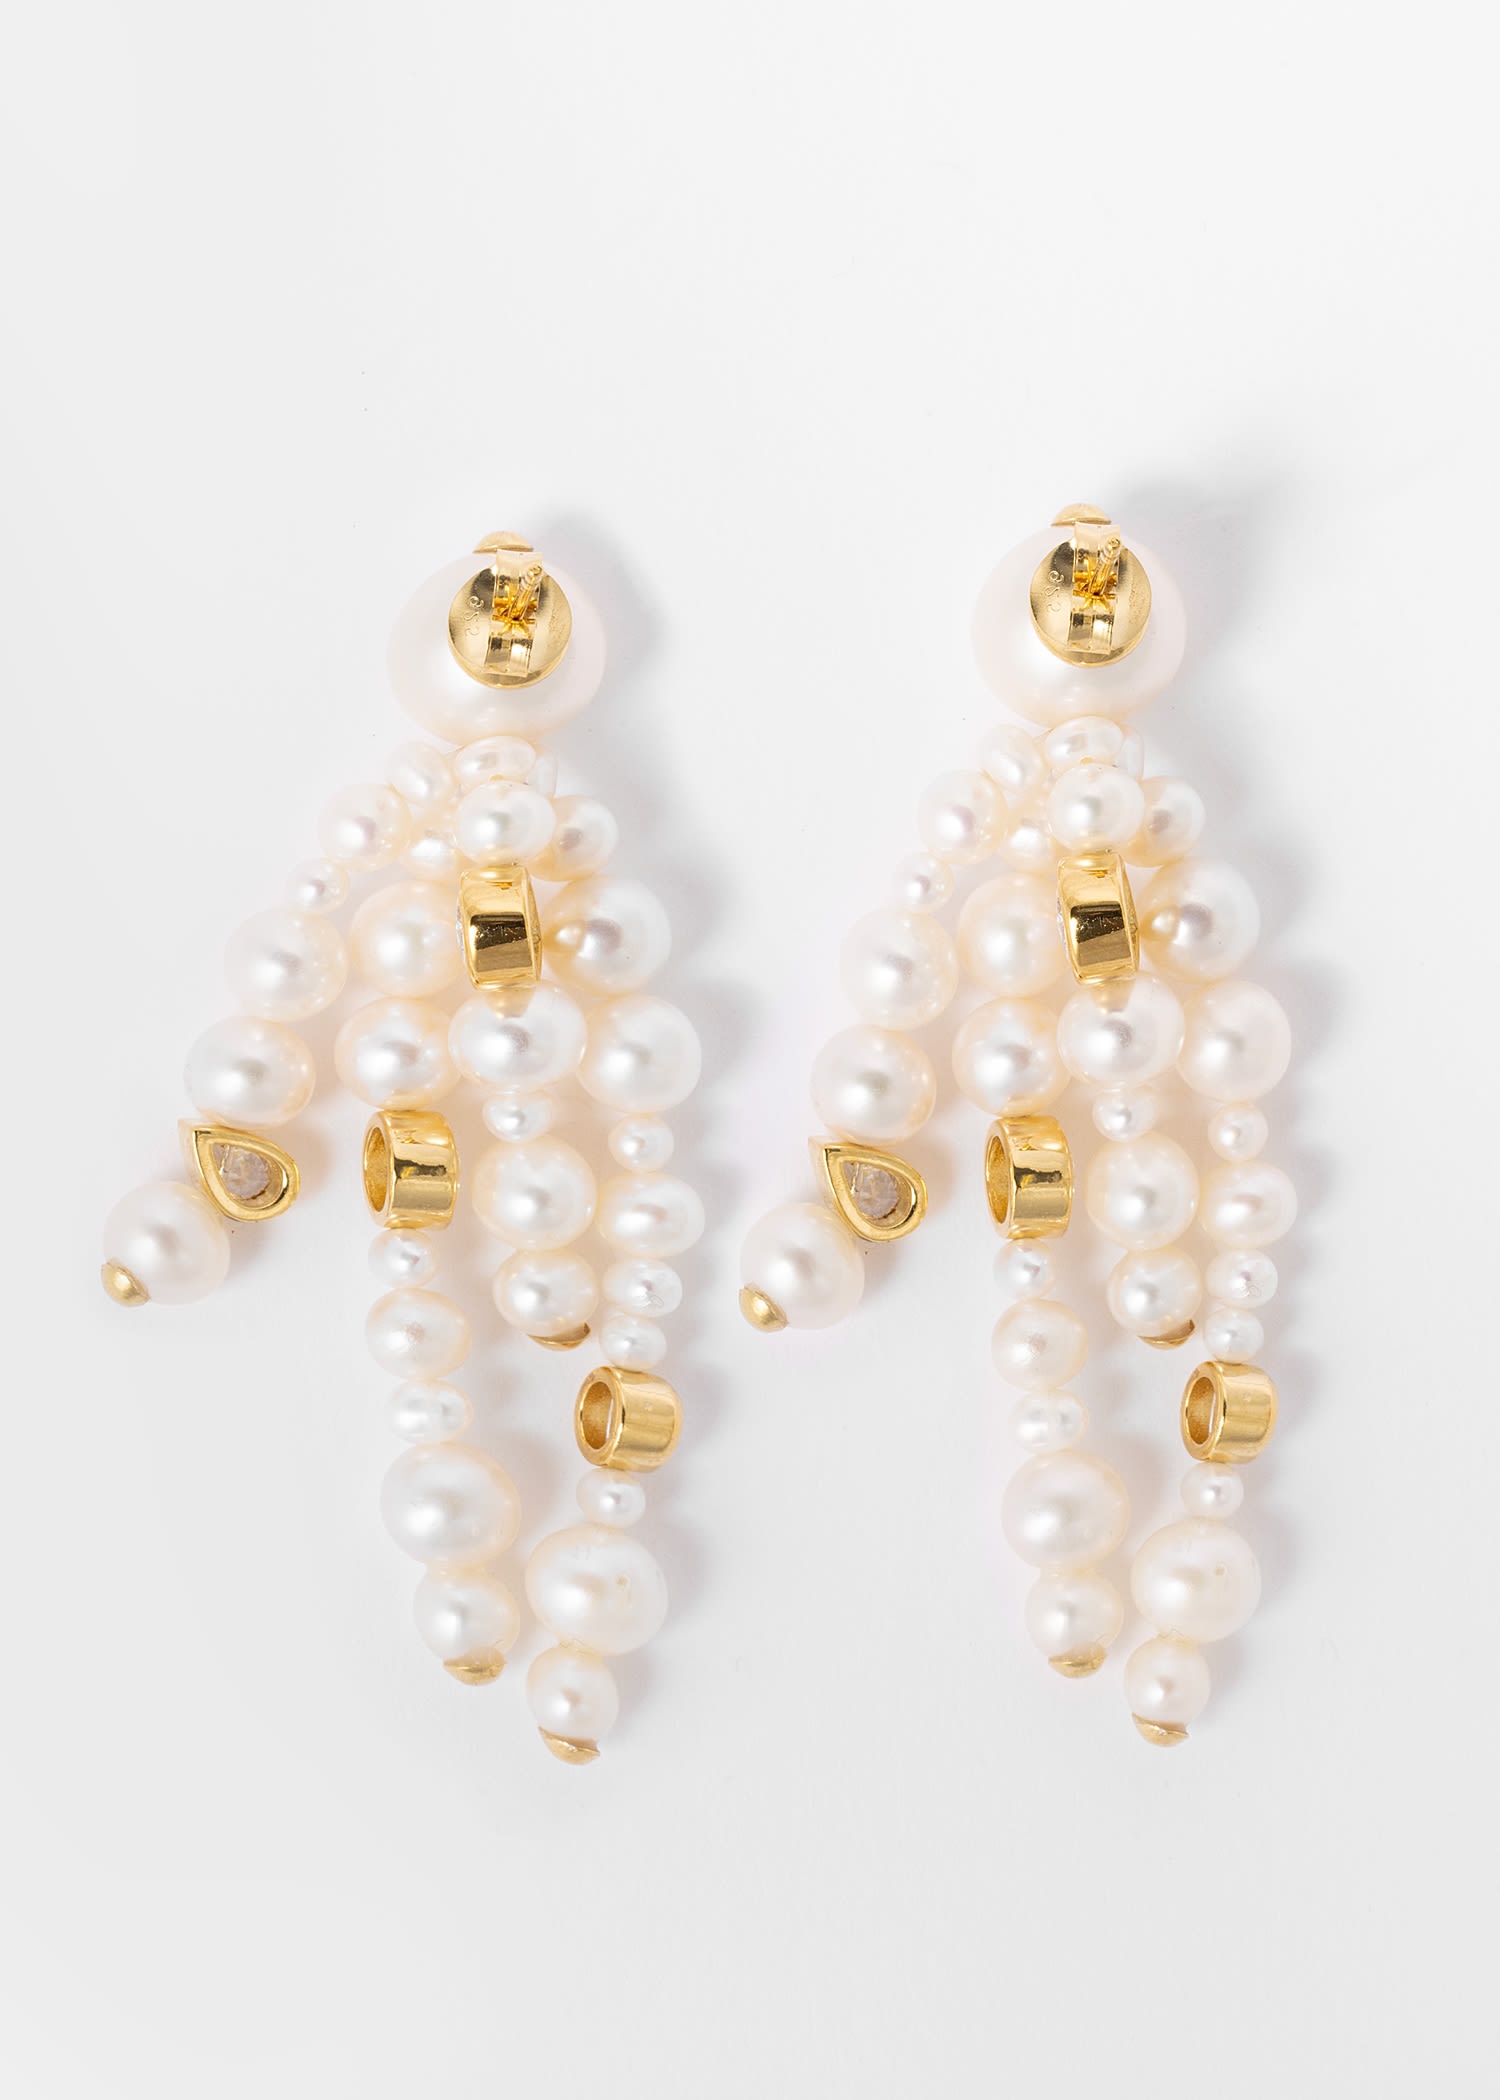 Pearl and Zirconia Gold Vermeil Earrings by Completedworks - 2